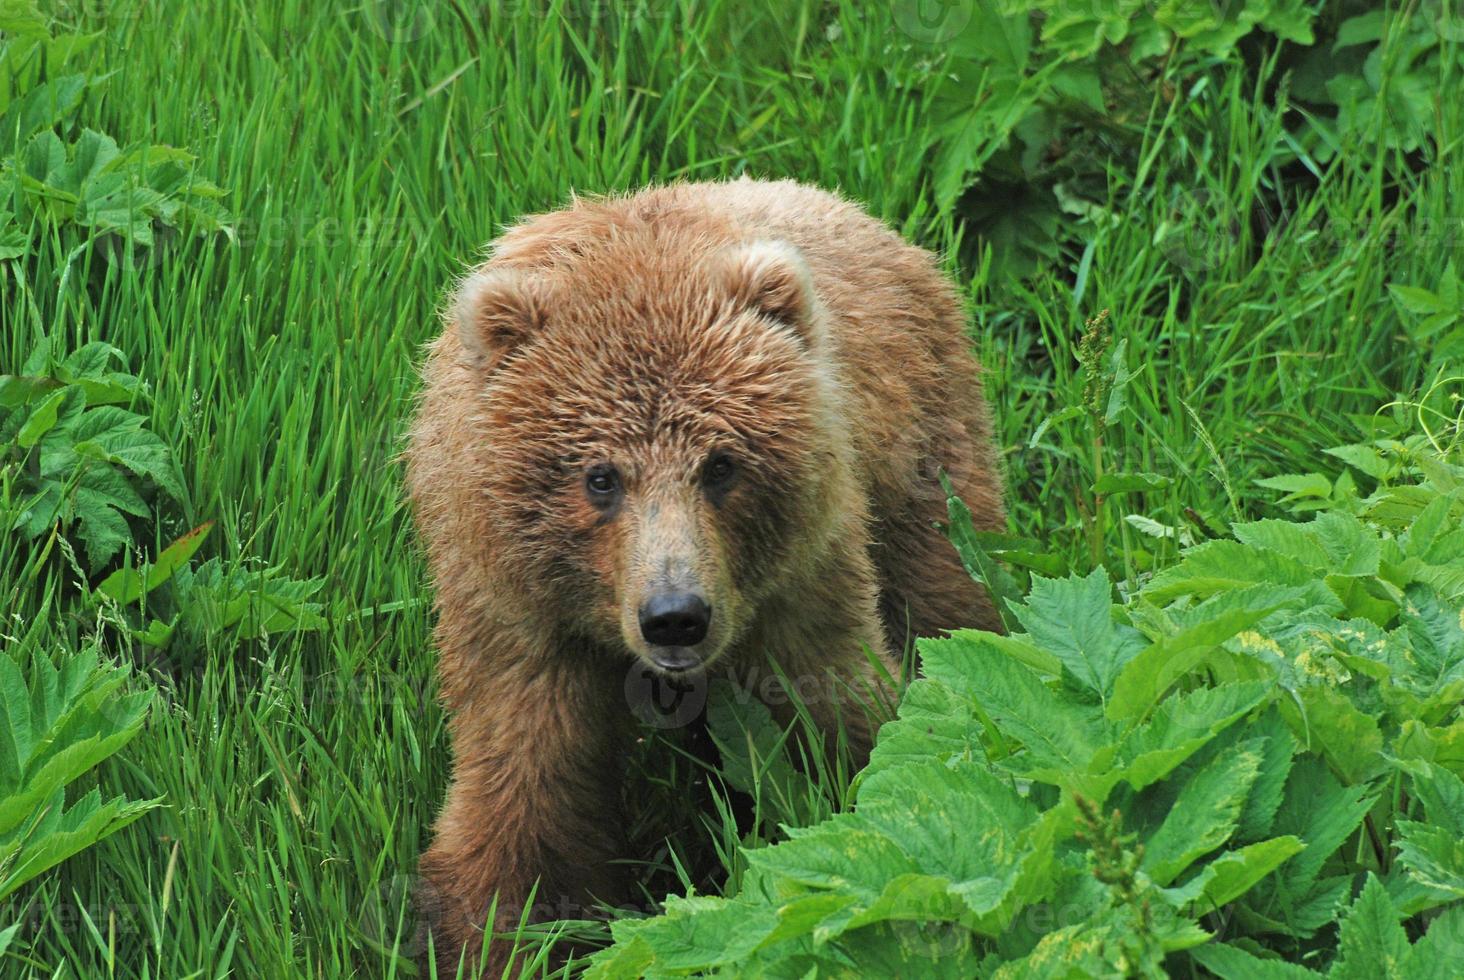 A young Bear in the wilds photo